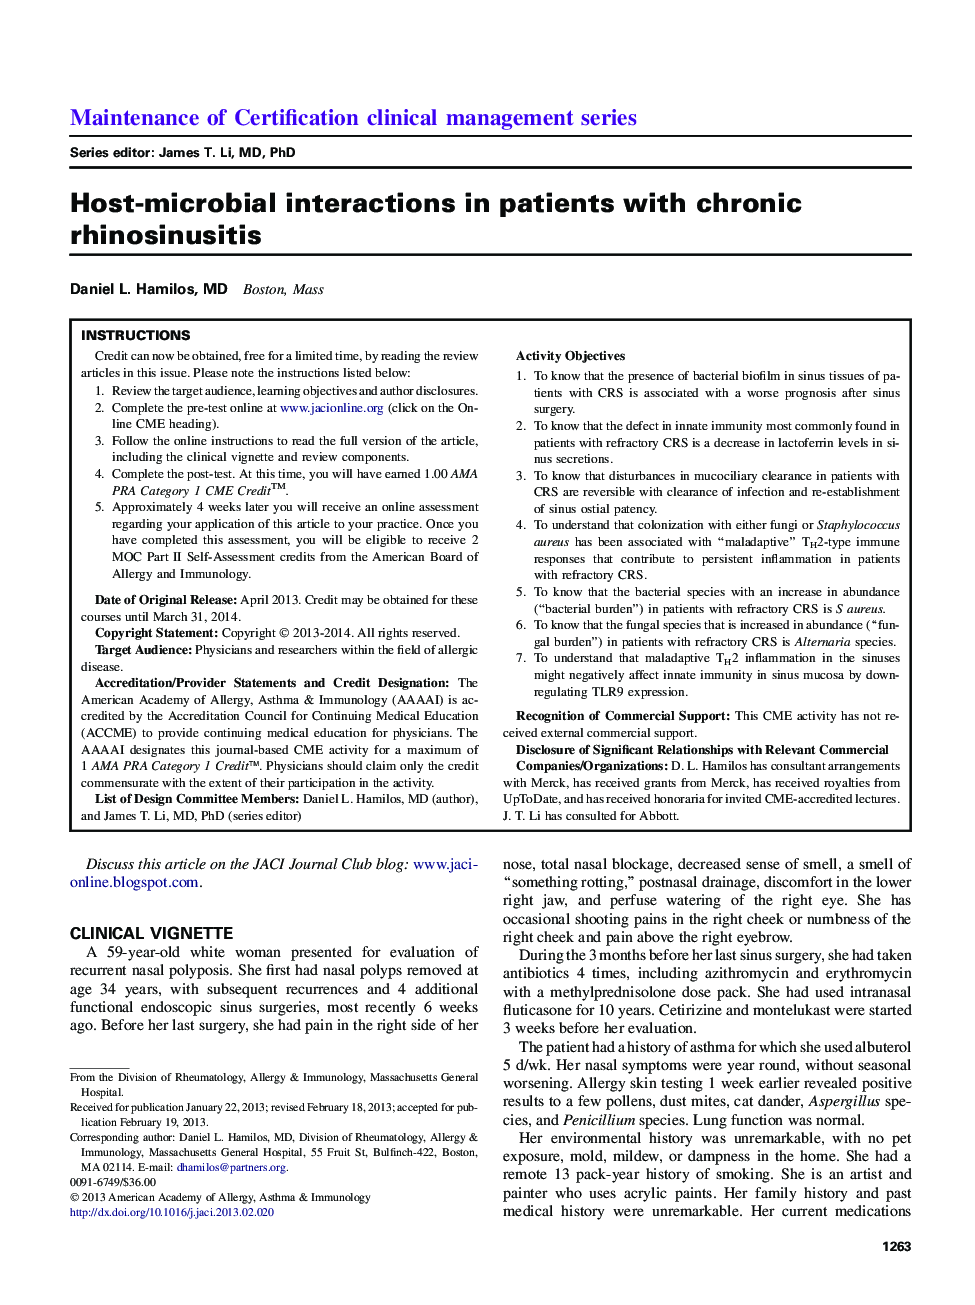 Host-microbial interactions in patients with chronic rhinosinusitis